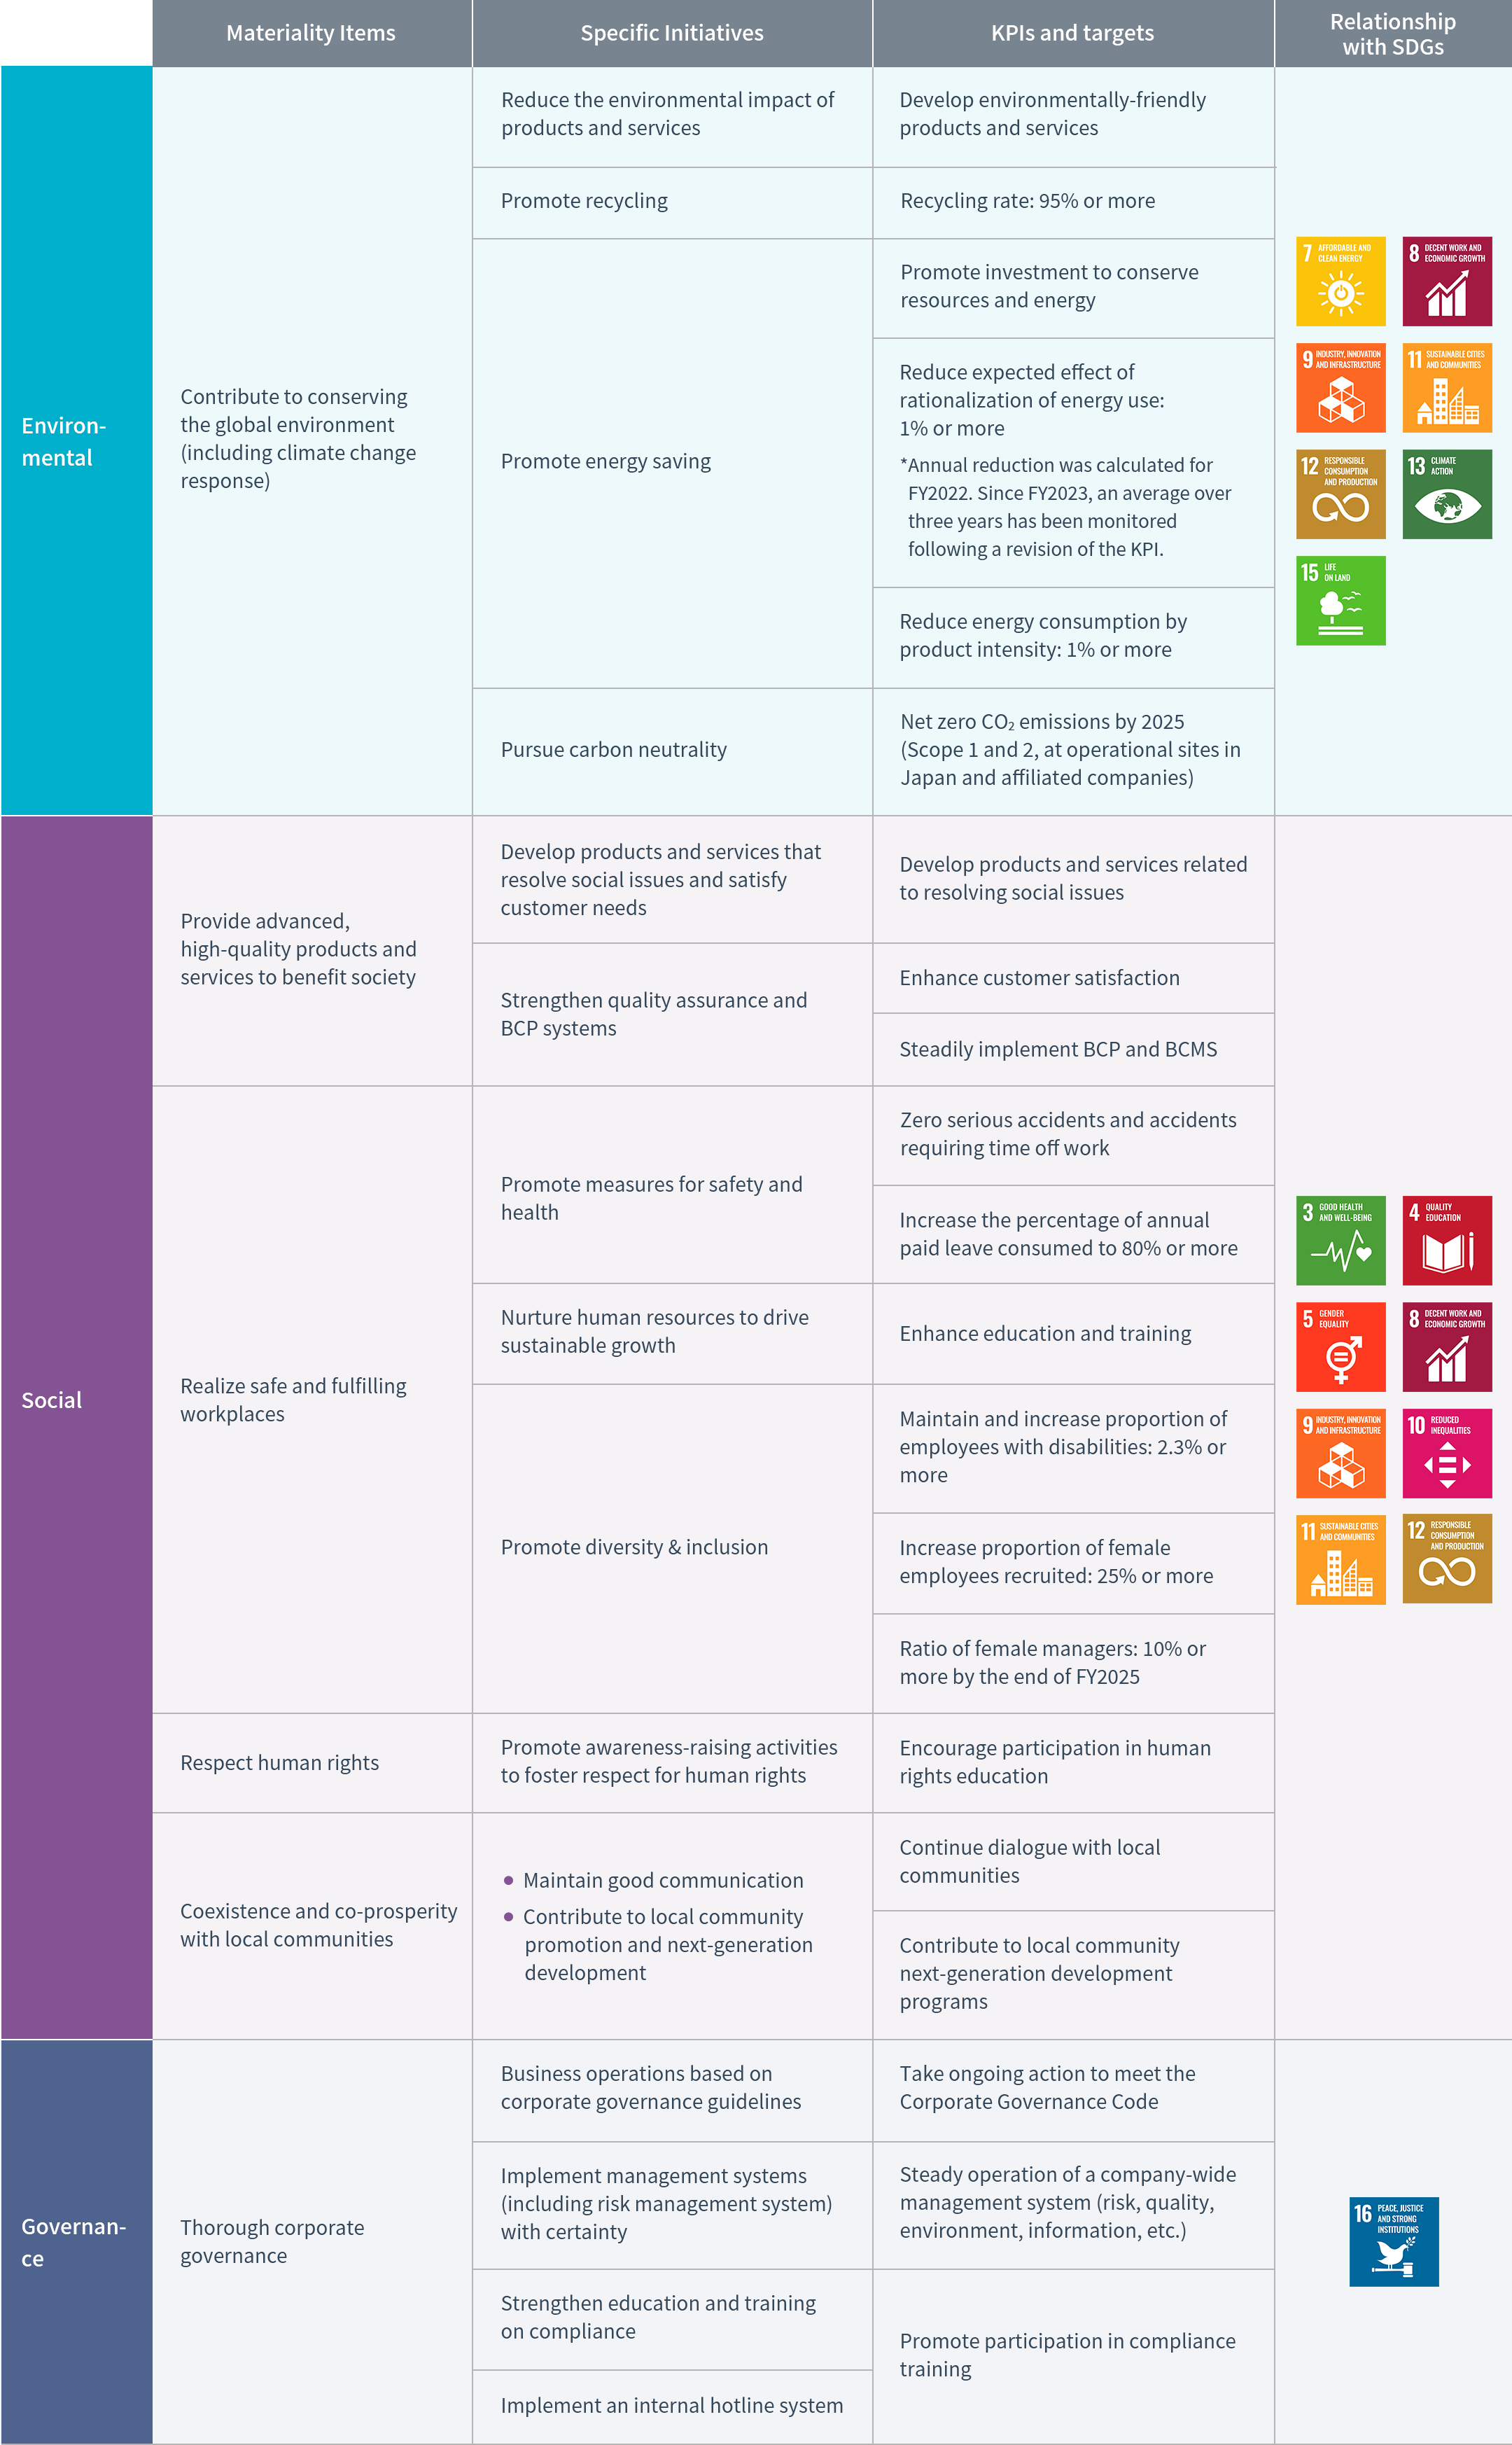 Table of materiality-based initiatives and related SDGs